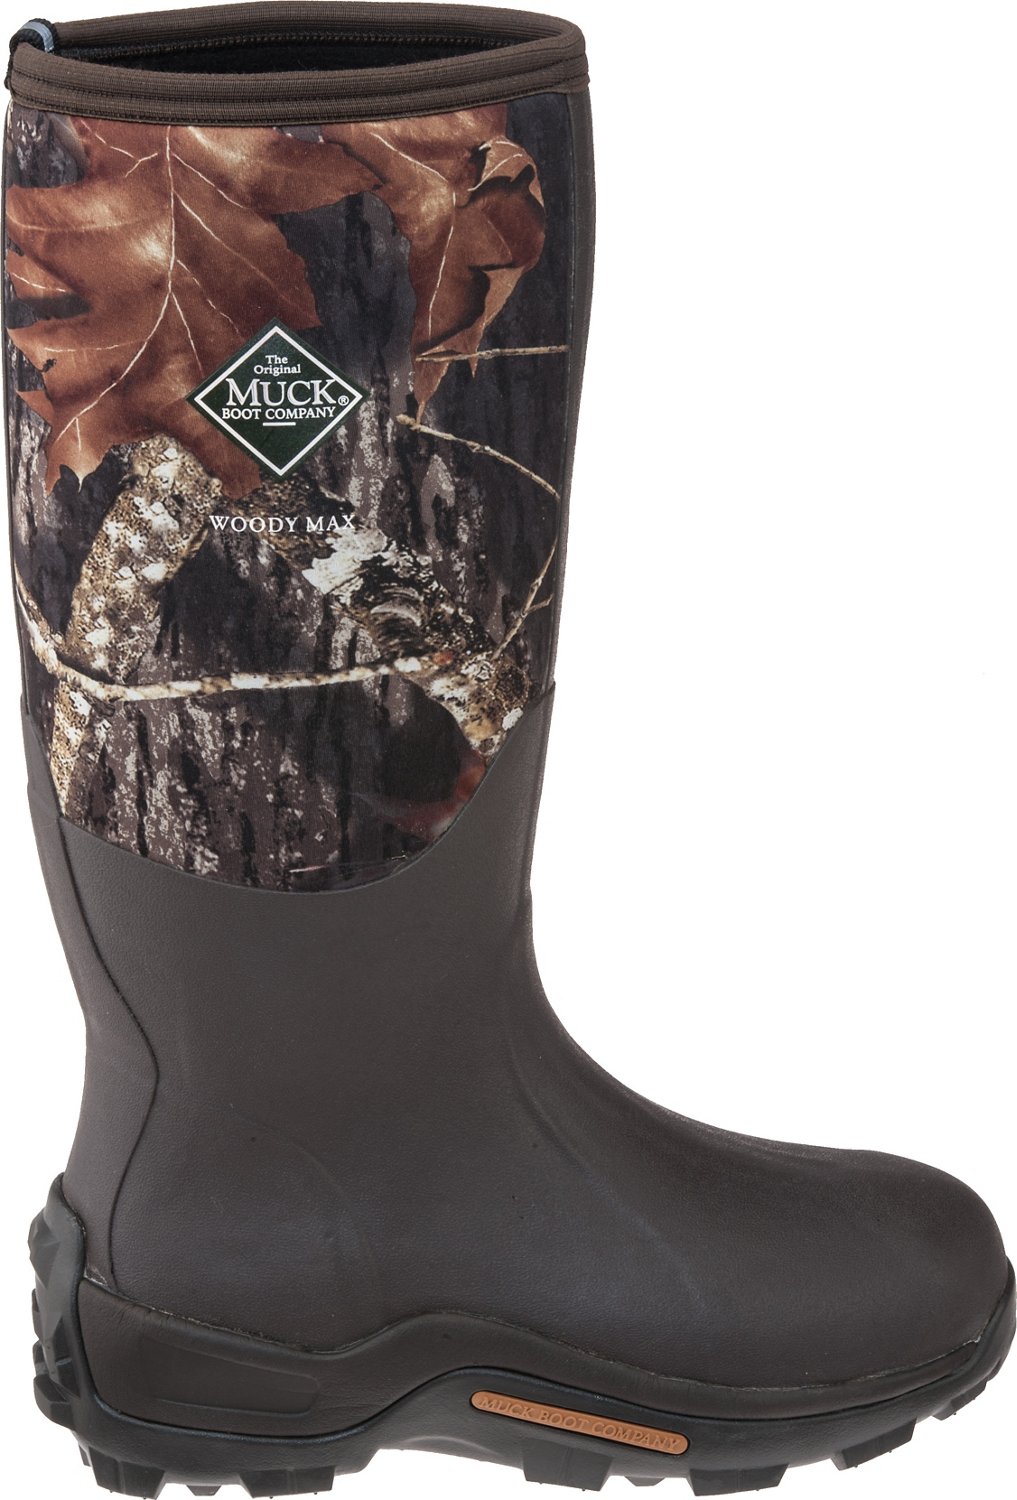 Hunting Boots | Men's Hunting Boots, Women's Hunting Boots